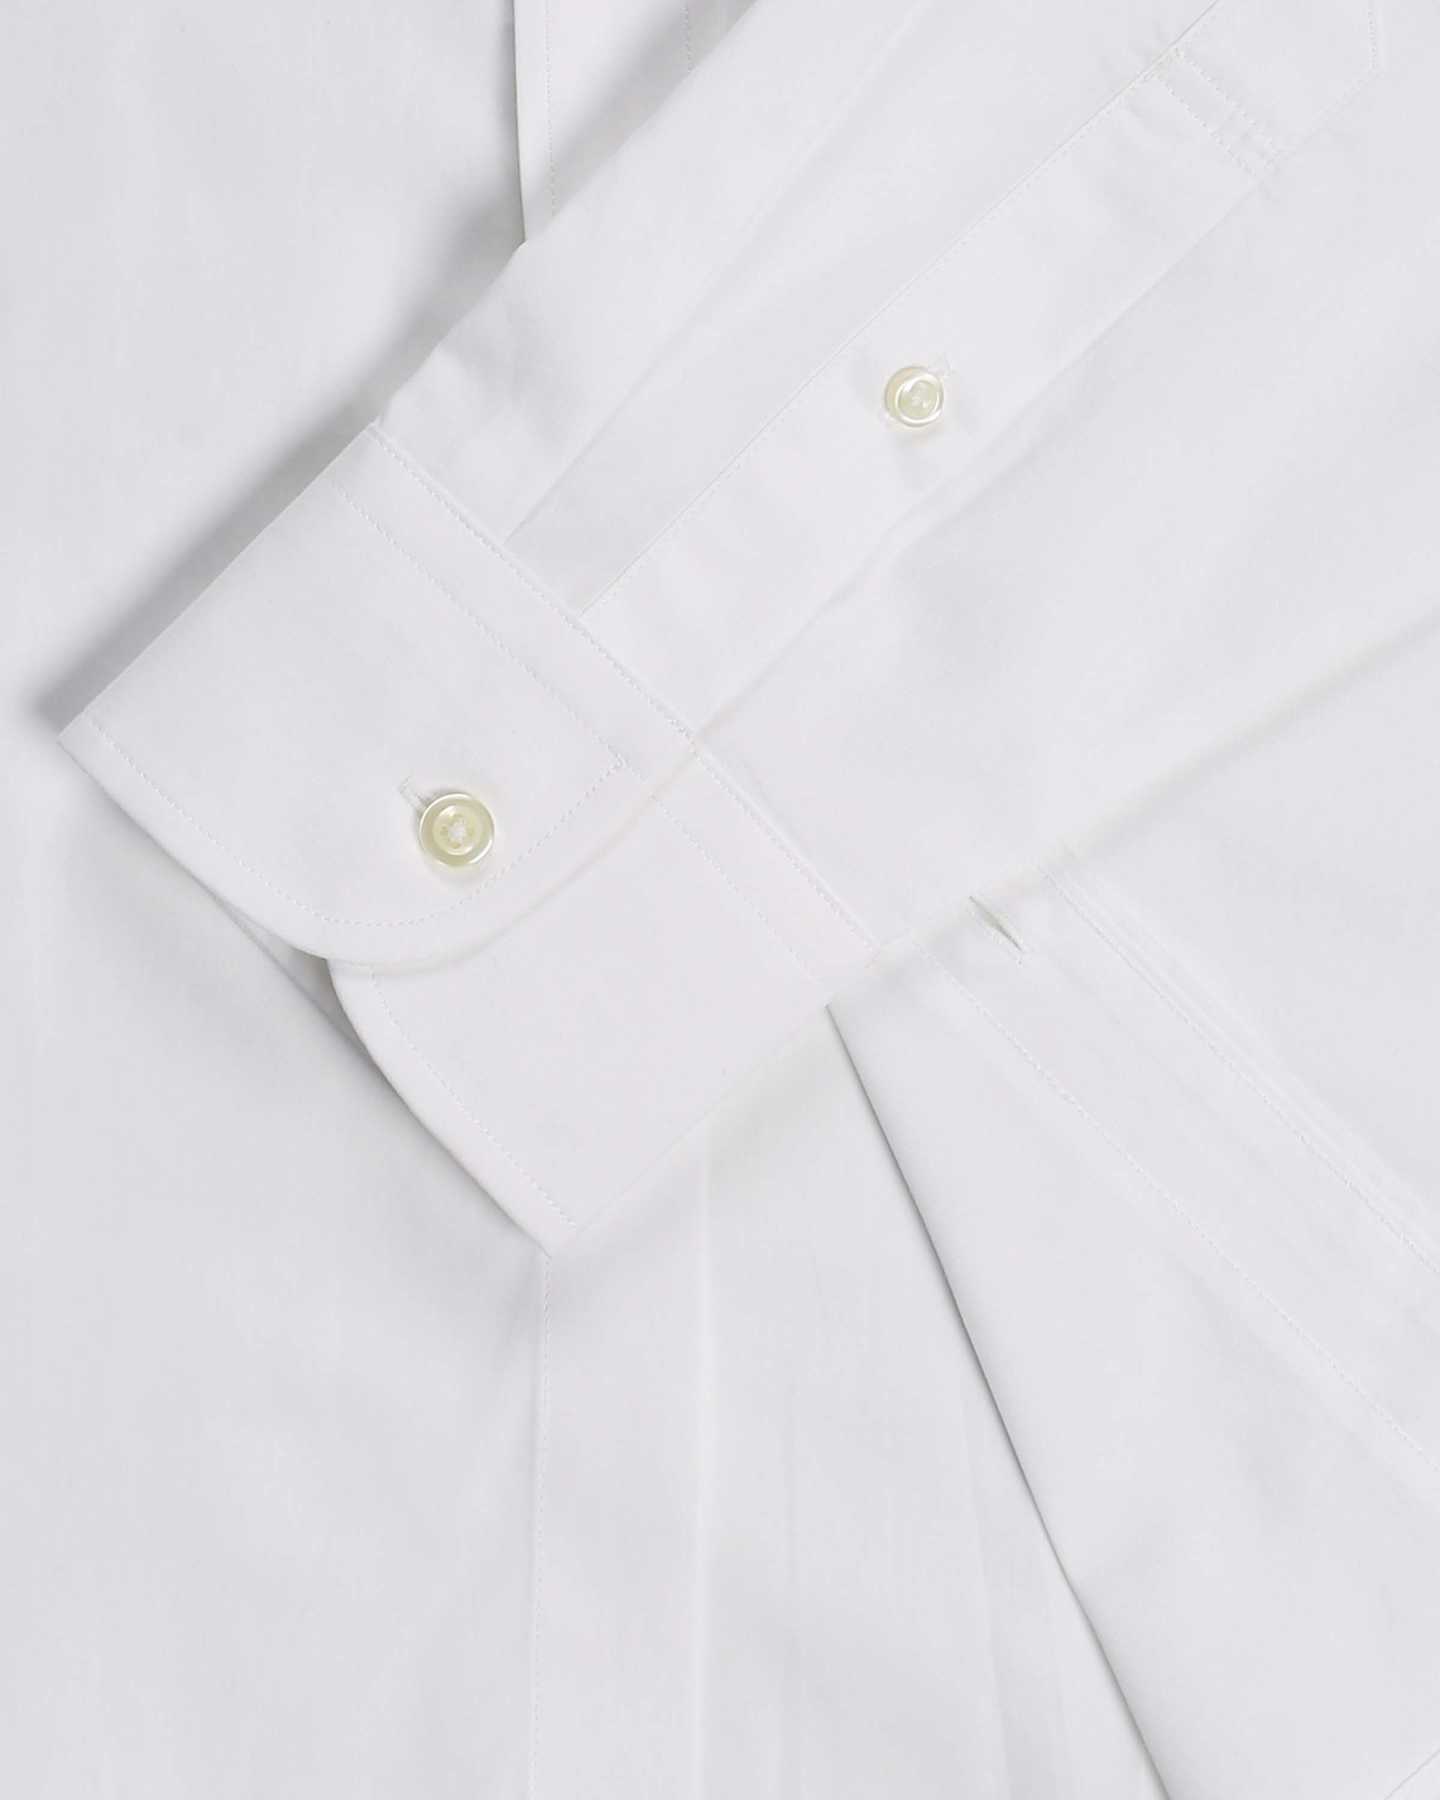 The Untucked Dress Shirt - Solid White - 7 - Thumbnail